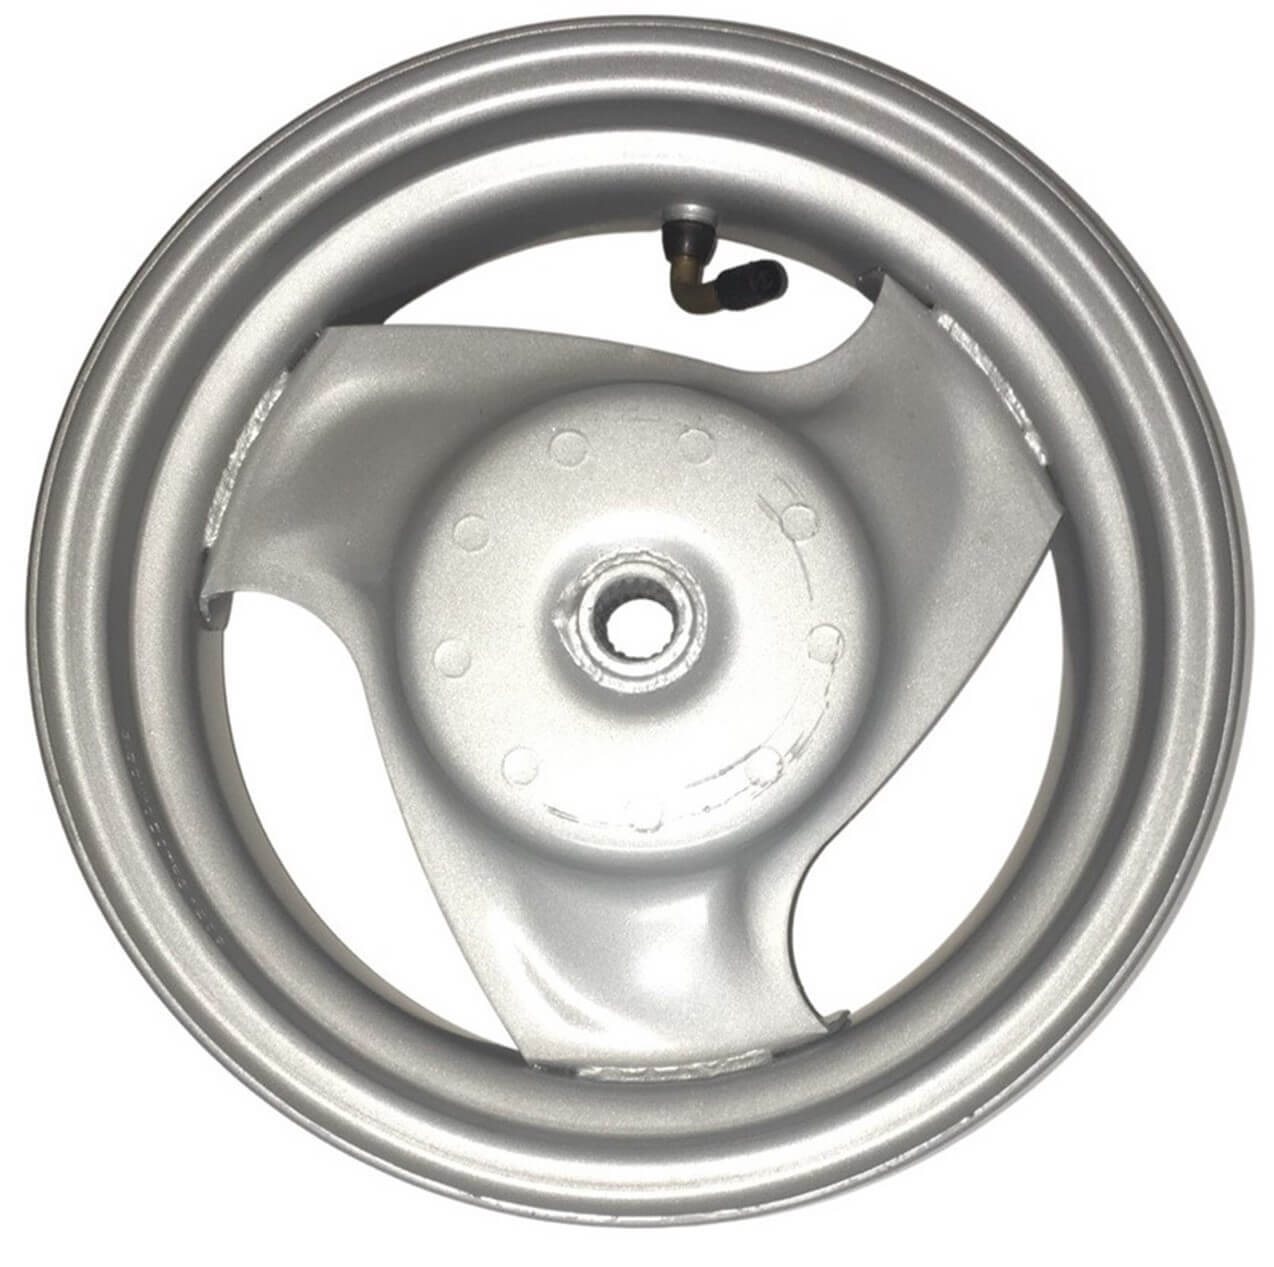 Rear Wheel Rim (Drum Brake) Fits E-Ton Beamer 50-150 Scooters + Others. Rim Size 3.50x10 Shaft ID=20 Splines=18 Drum ID=110mm - Click Image to Close